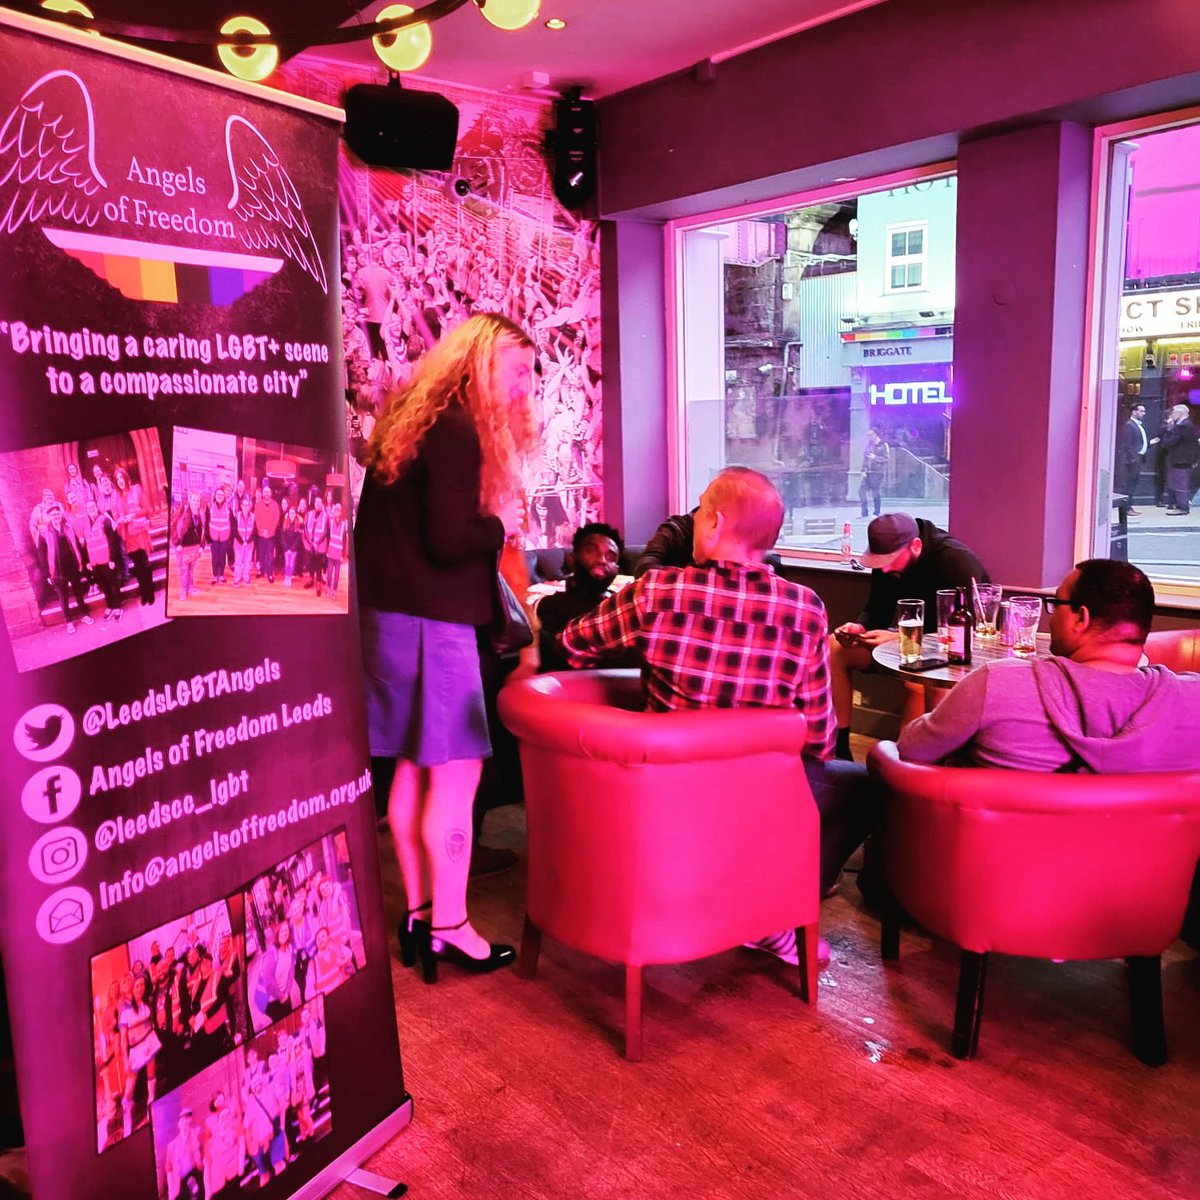 Join us from 6pm this evening for our monthly social drinks event at Queens Court - you’ll find us in the entrance area of the bar! #MakeFriendsInLeeds #Leeds #LGBTQ #LGBTCommunity #GayLeeds #QueerLeeds #LGBTInclusiveLeeds